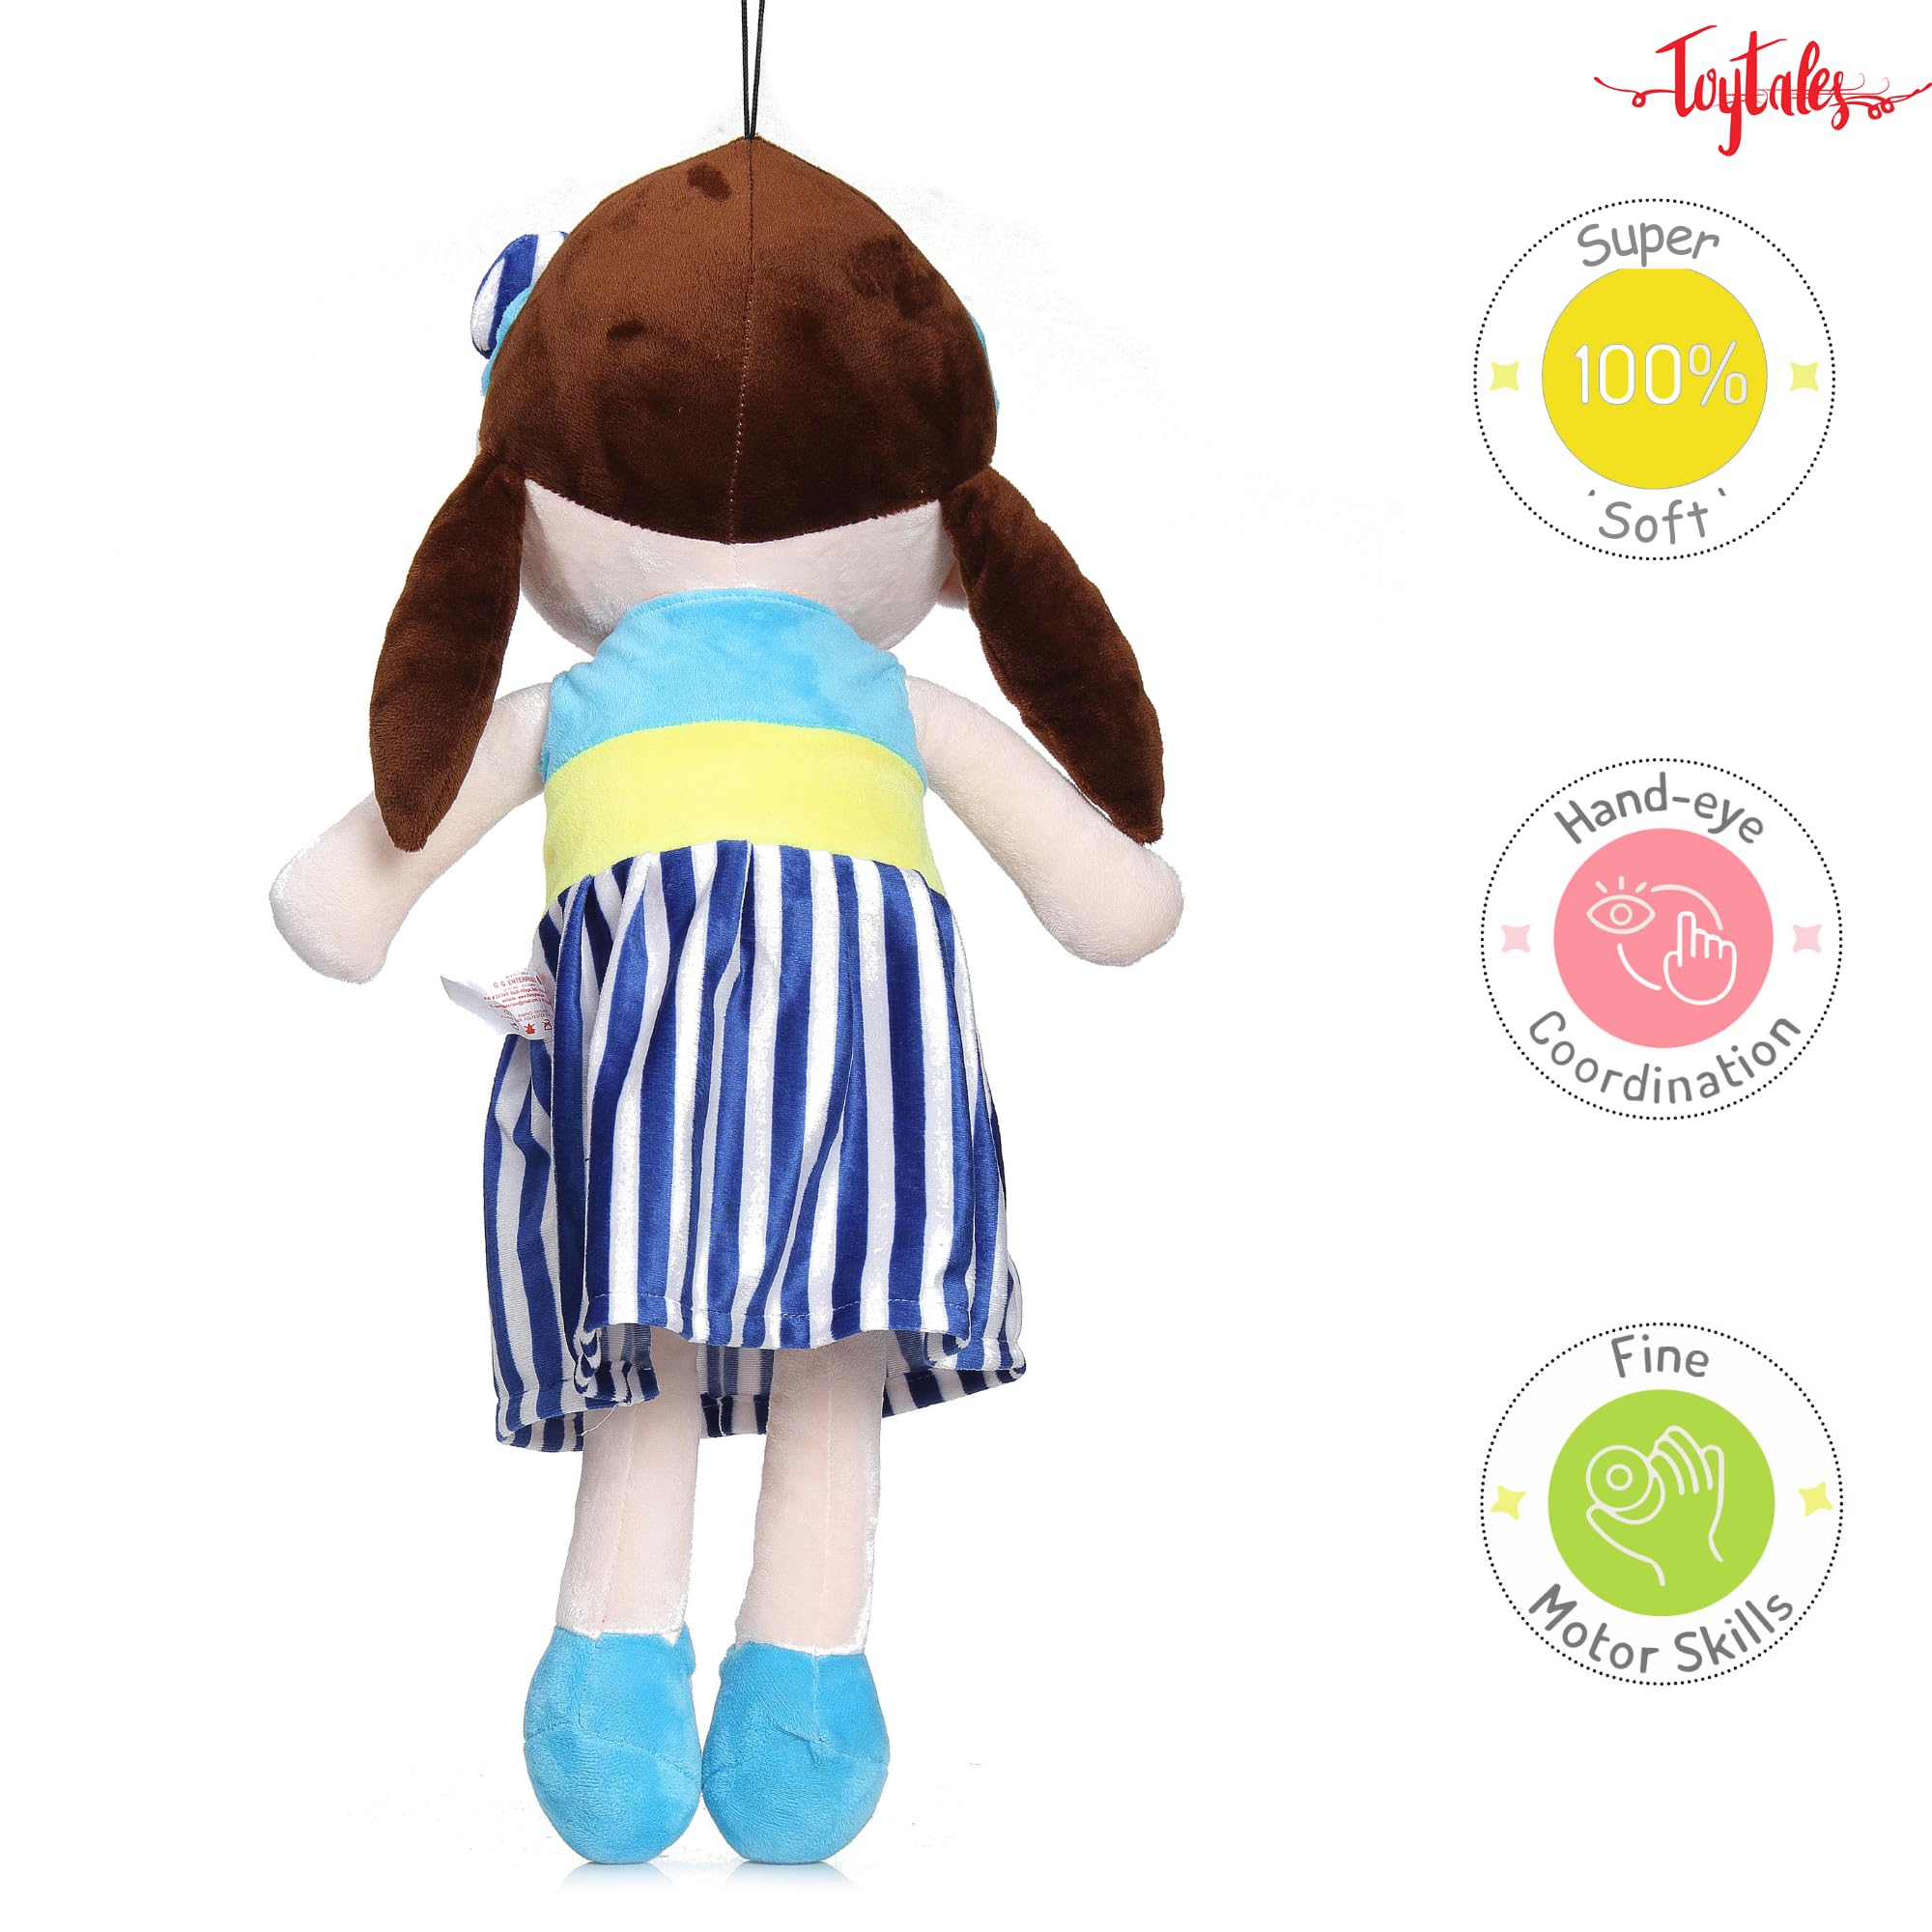 Cute Super Soft Stuffed Doll Small Size 40cm, Cuddly Squishy Dolls, Plush Toy for Baby Girls, Spark Imaginative Play, Safe & Fun Gift for Kids, Perfect for Playtime & Cuddling (Blue)